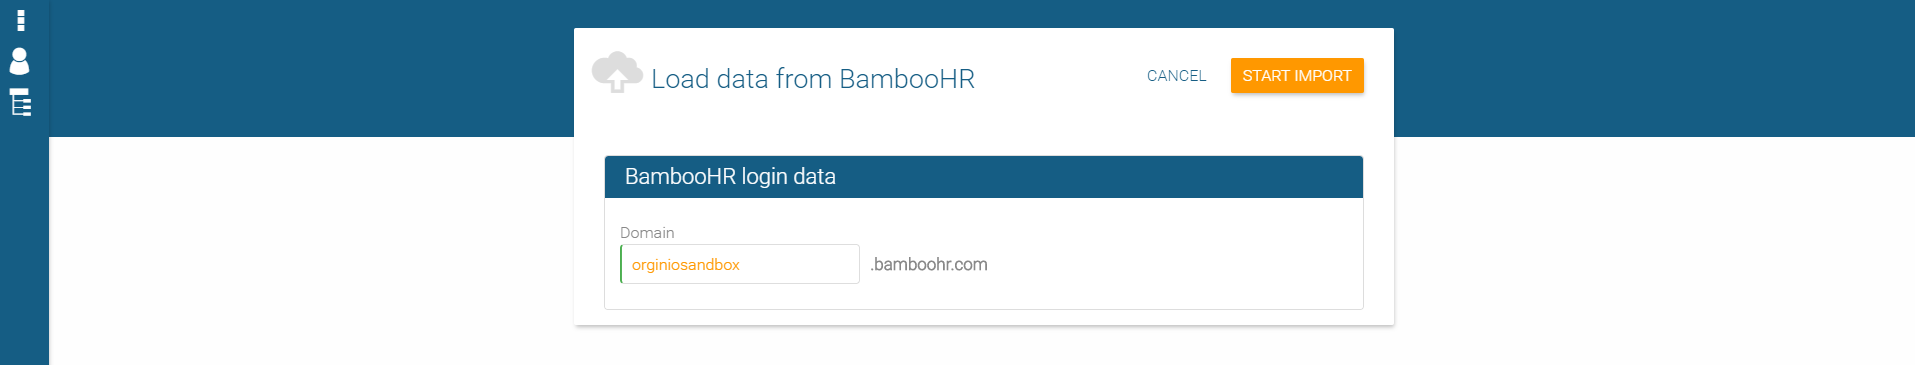 How to import data from Bamboo HR to orginio